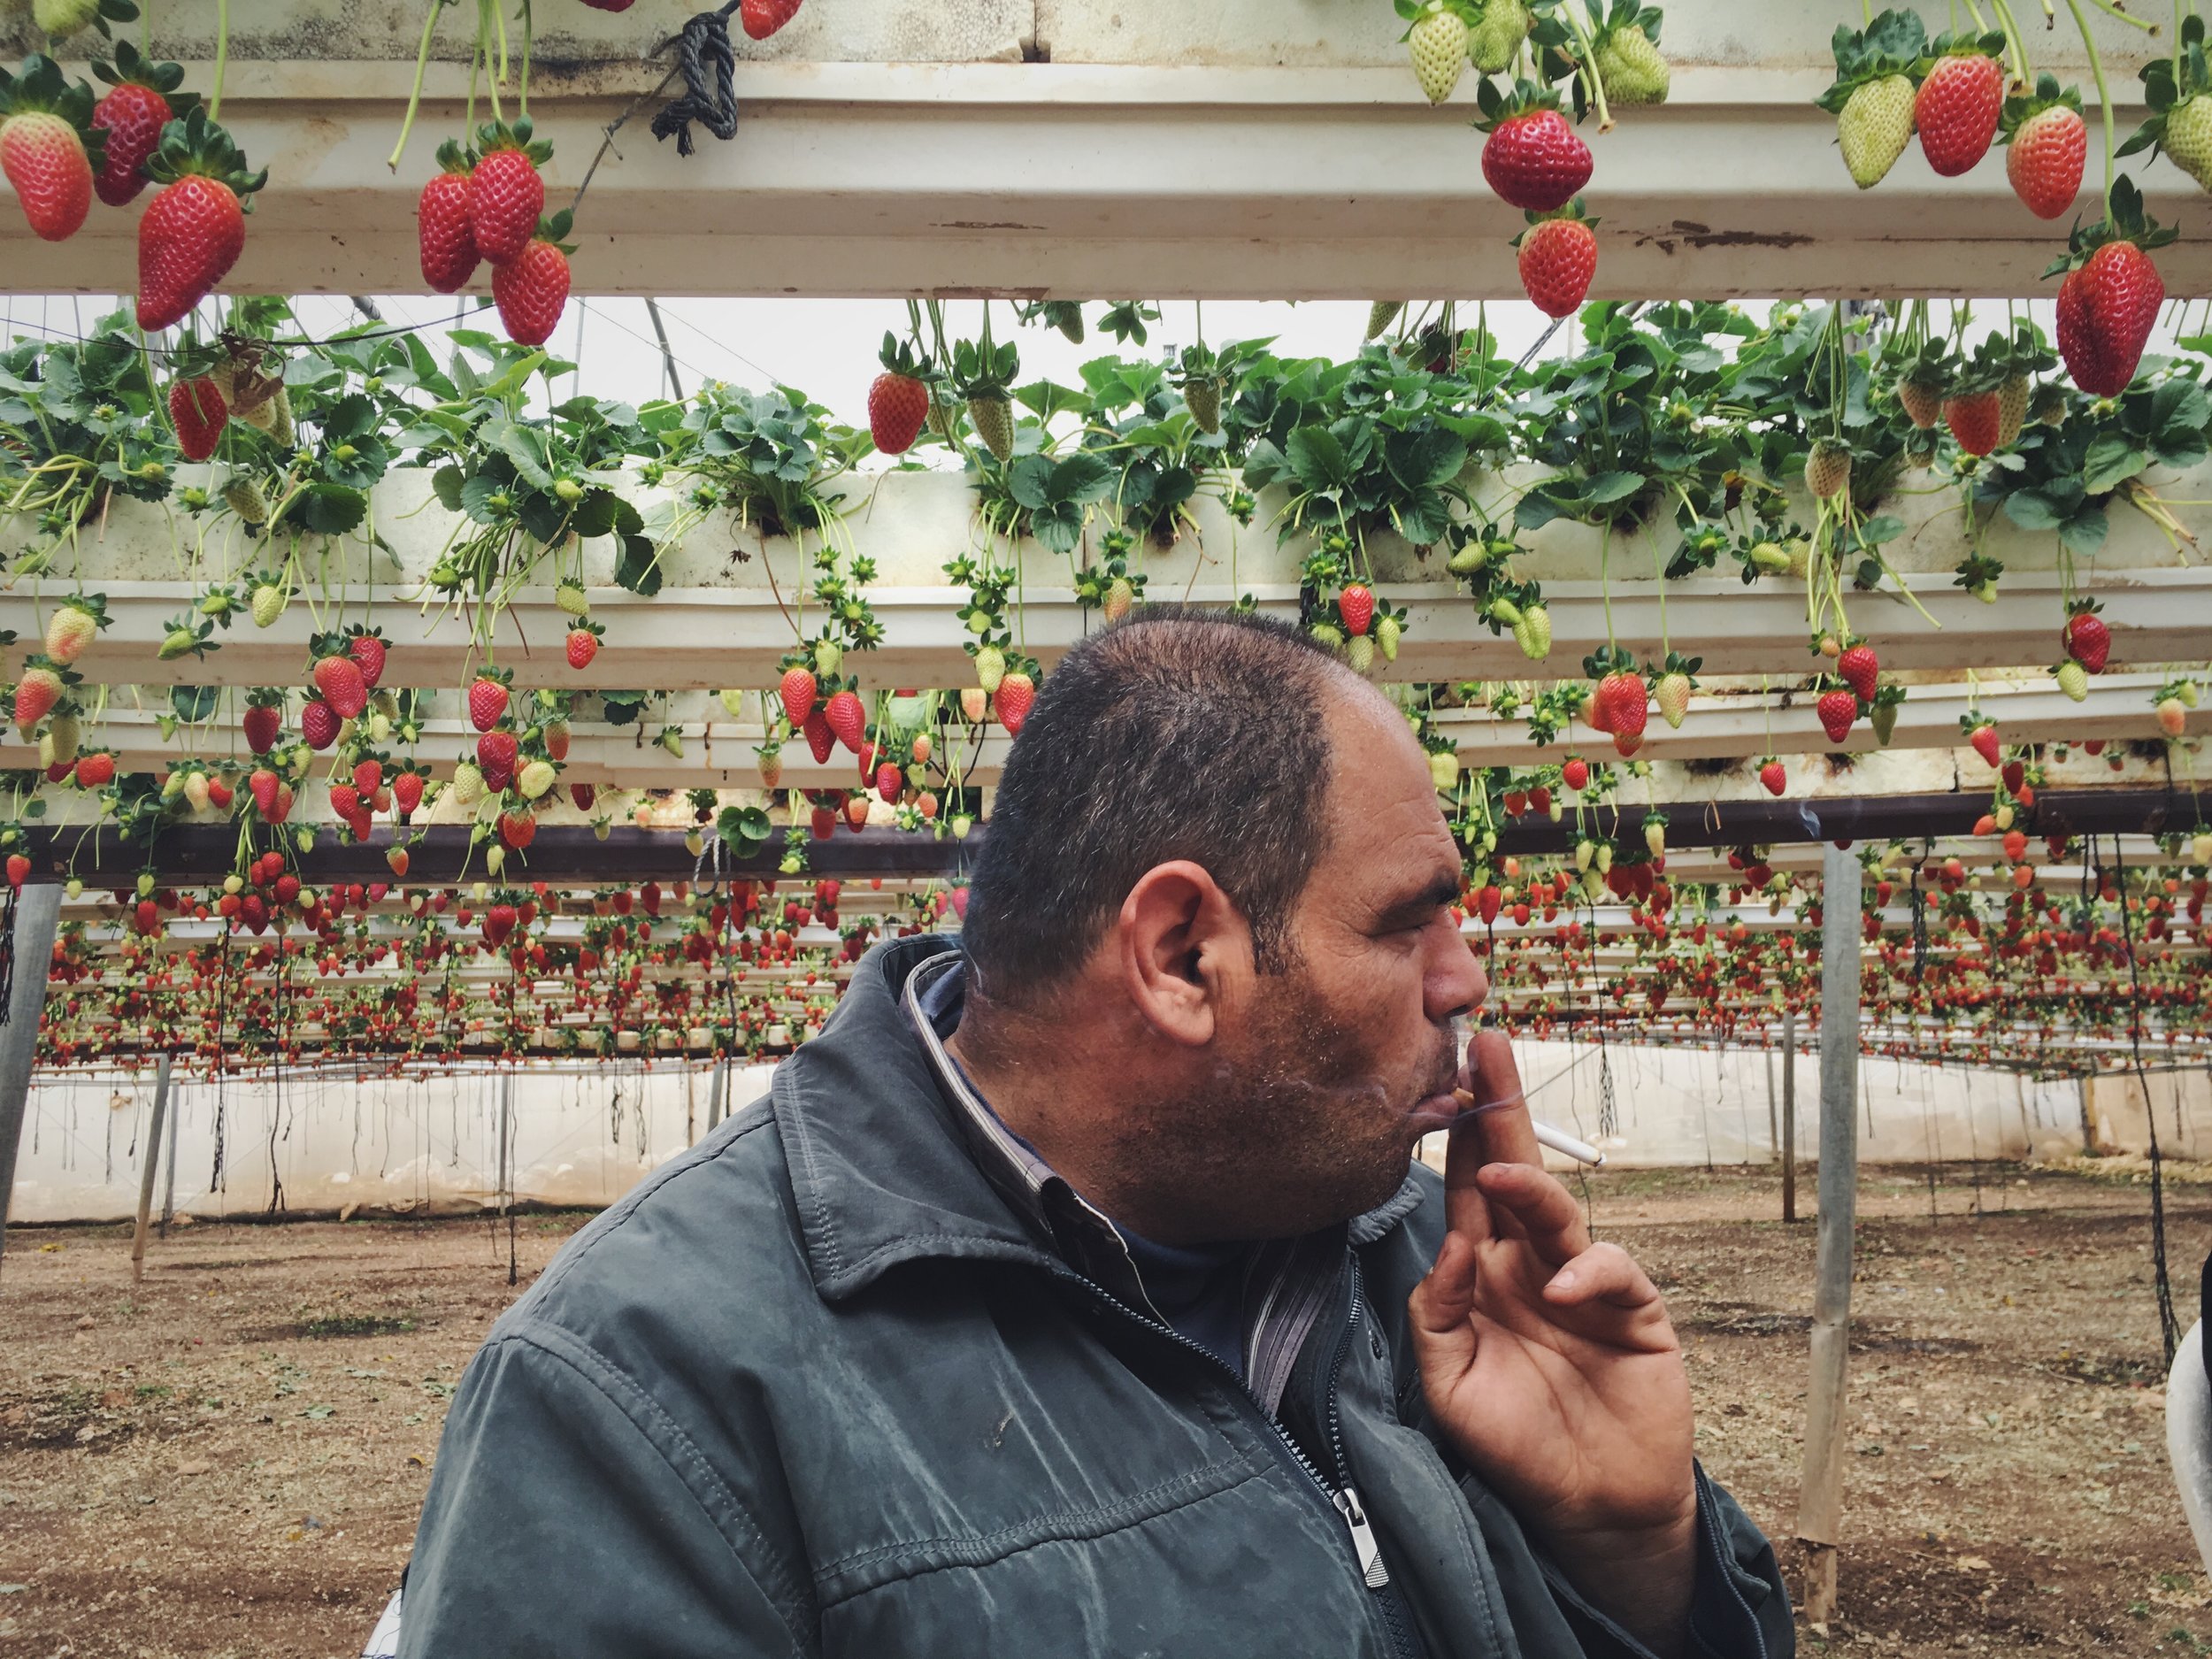  Omran Shadid, a strawberry farmer near the northern West Bank town of Jenin, takes a cigarette break. Strawberries came to the West Bank in 2009 and Omran invested in them because "The appearance is attractive," he says. "It gives you nice art, good